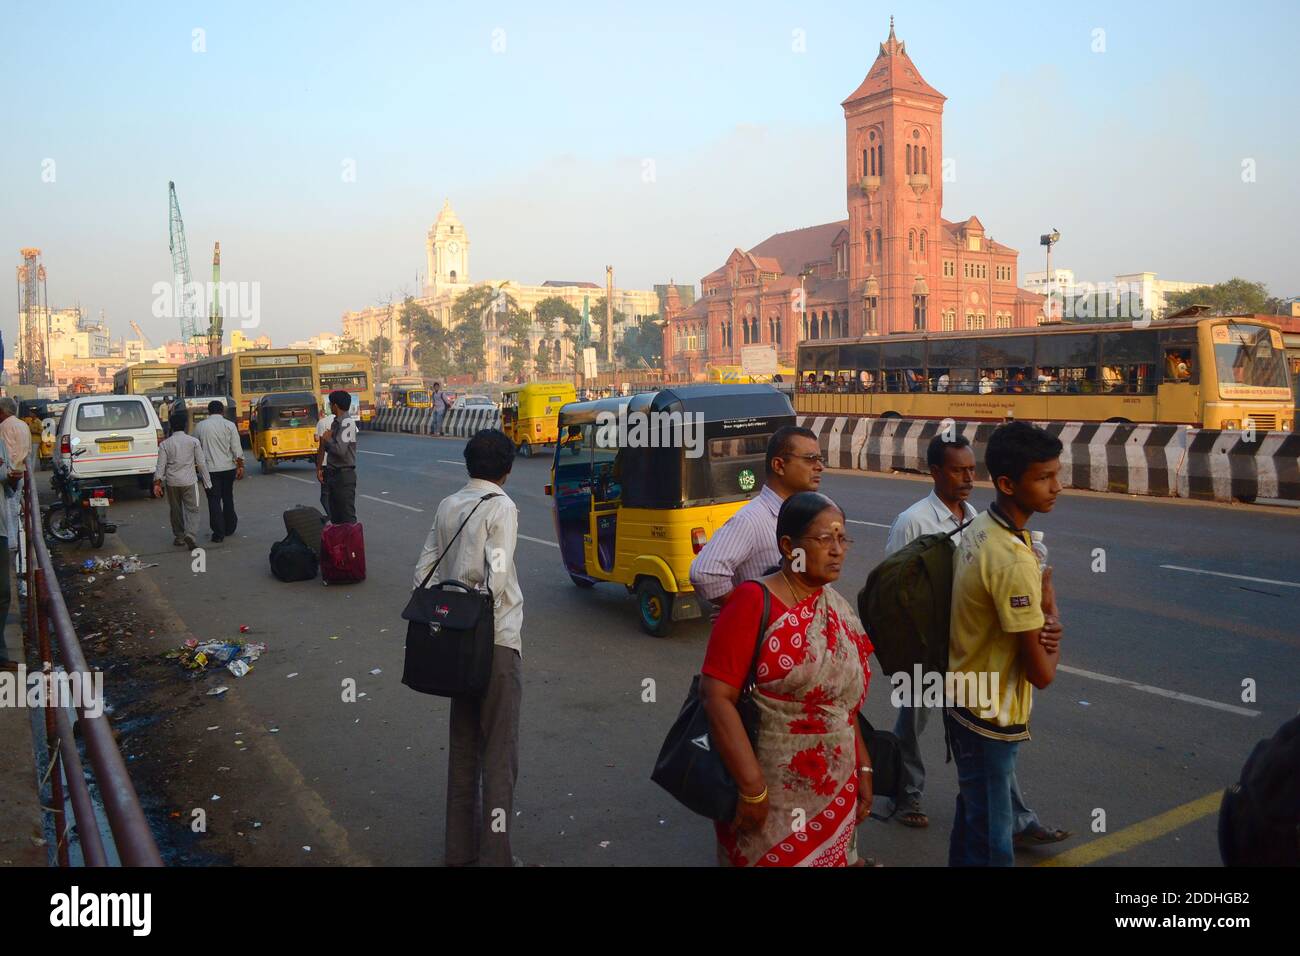 Chennai, Tamil Nadu, India - March, 2014:  People waiting bus or tuk tuk taxi on a bas stop against The Victoria Memorial Hall building Stock Photo